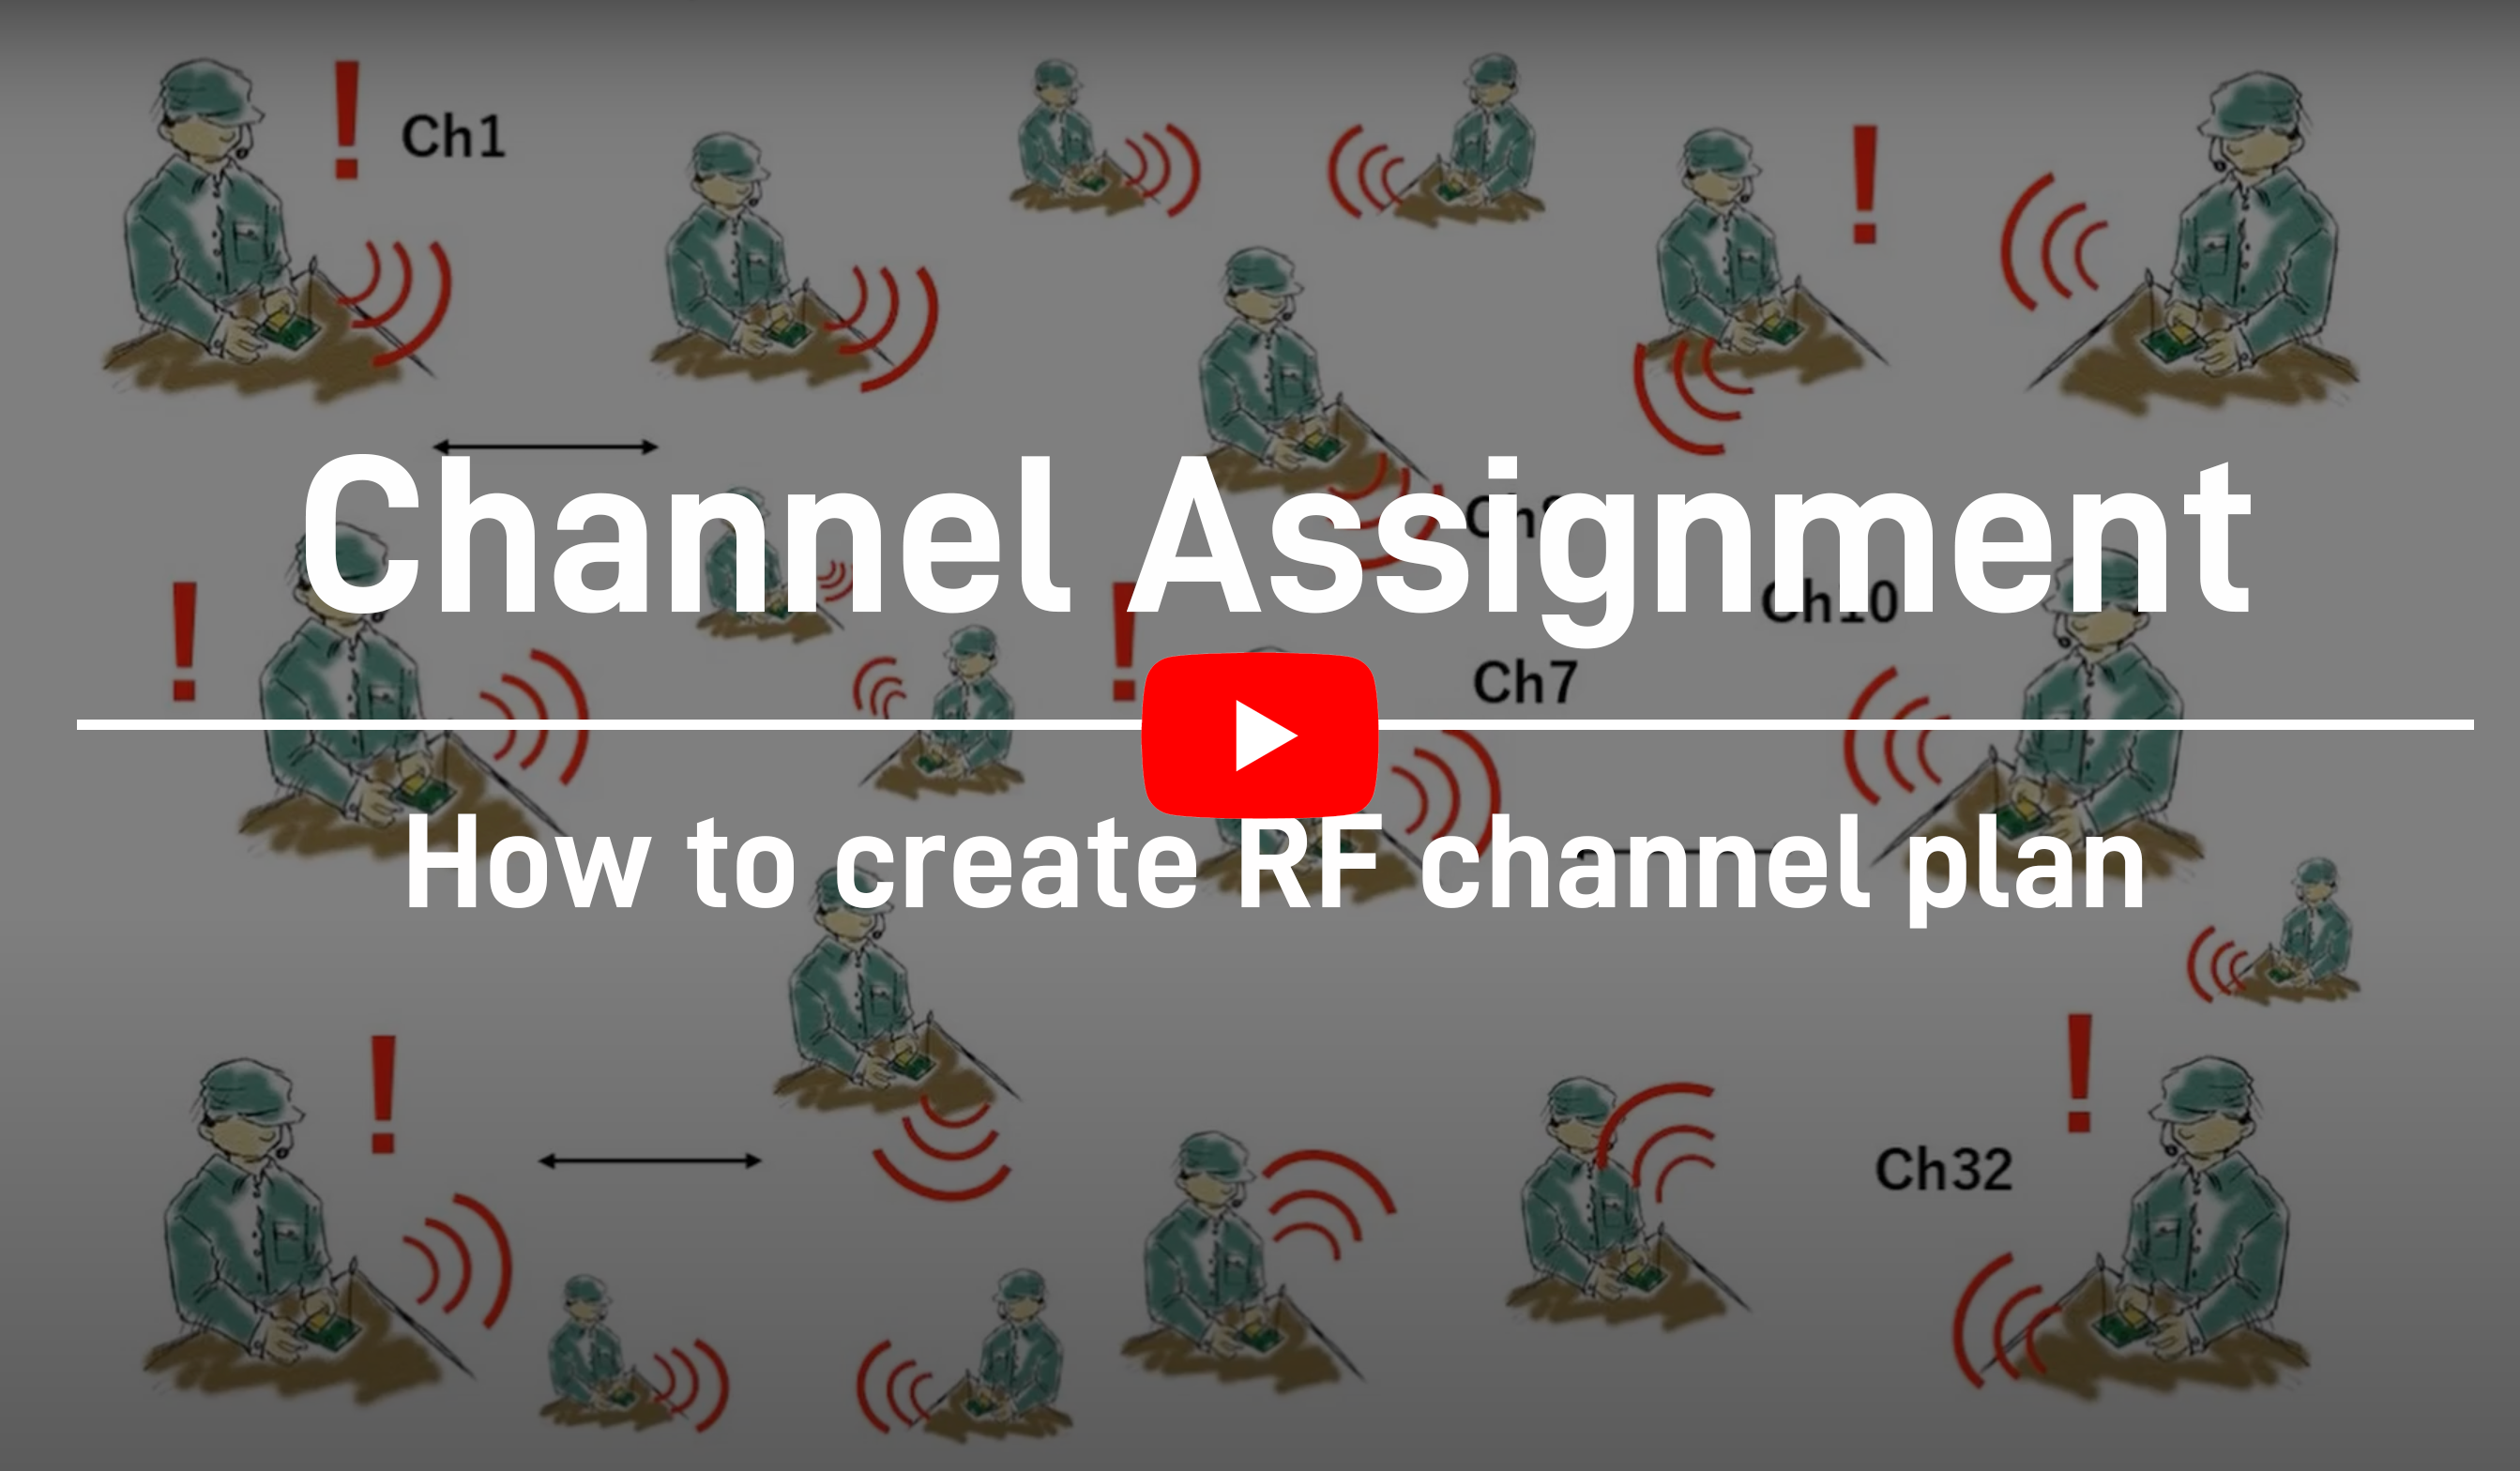 [ Video ] Channel Assignment - How to create RF channel plan